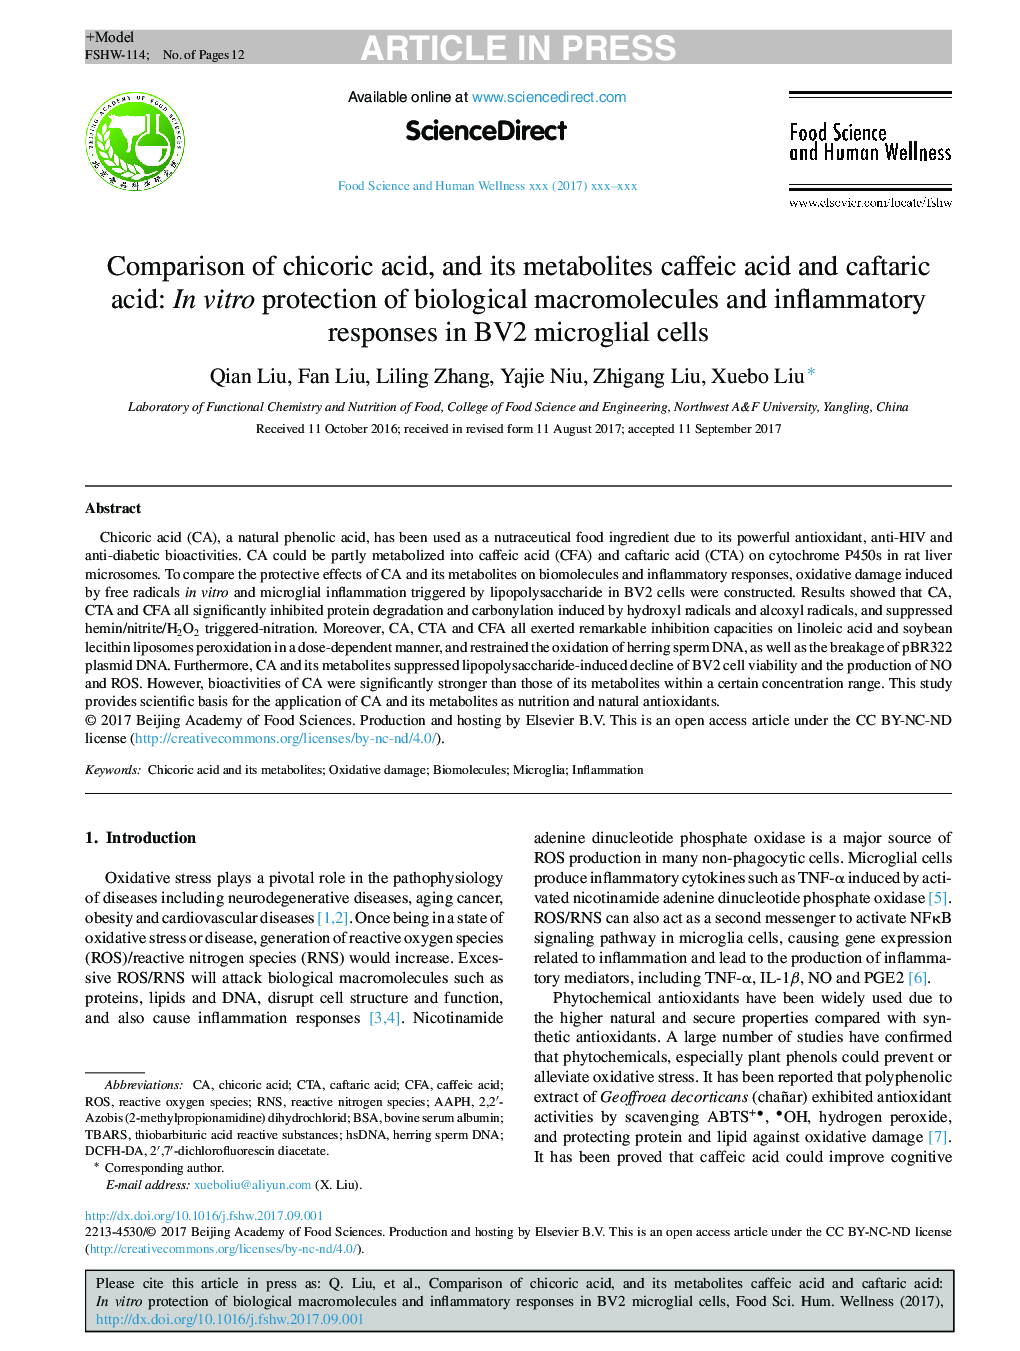 Comparison of chicoric acid, and its metabolites caffeic acid and caftaric acid: In vitro protection of biological macromolecules and inflammatory responses in BV2 microglial cells